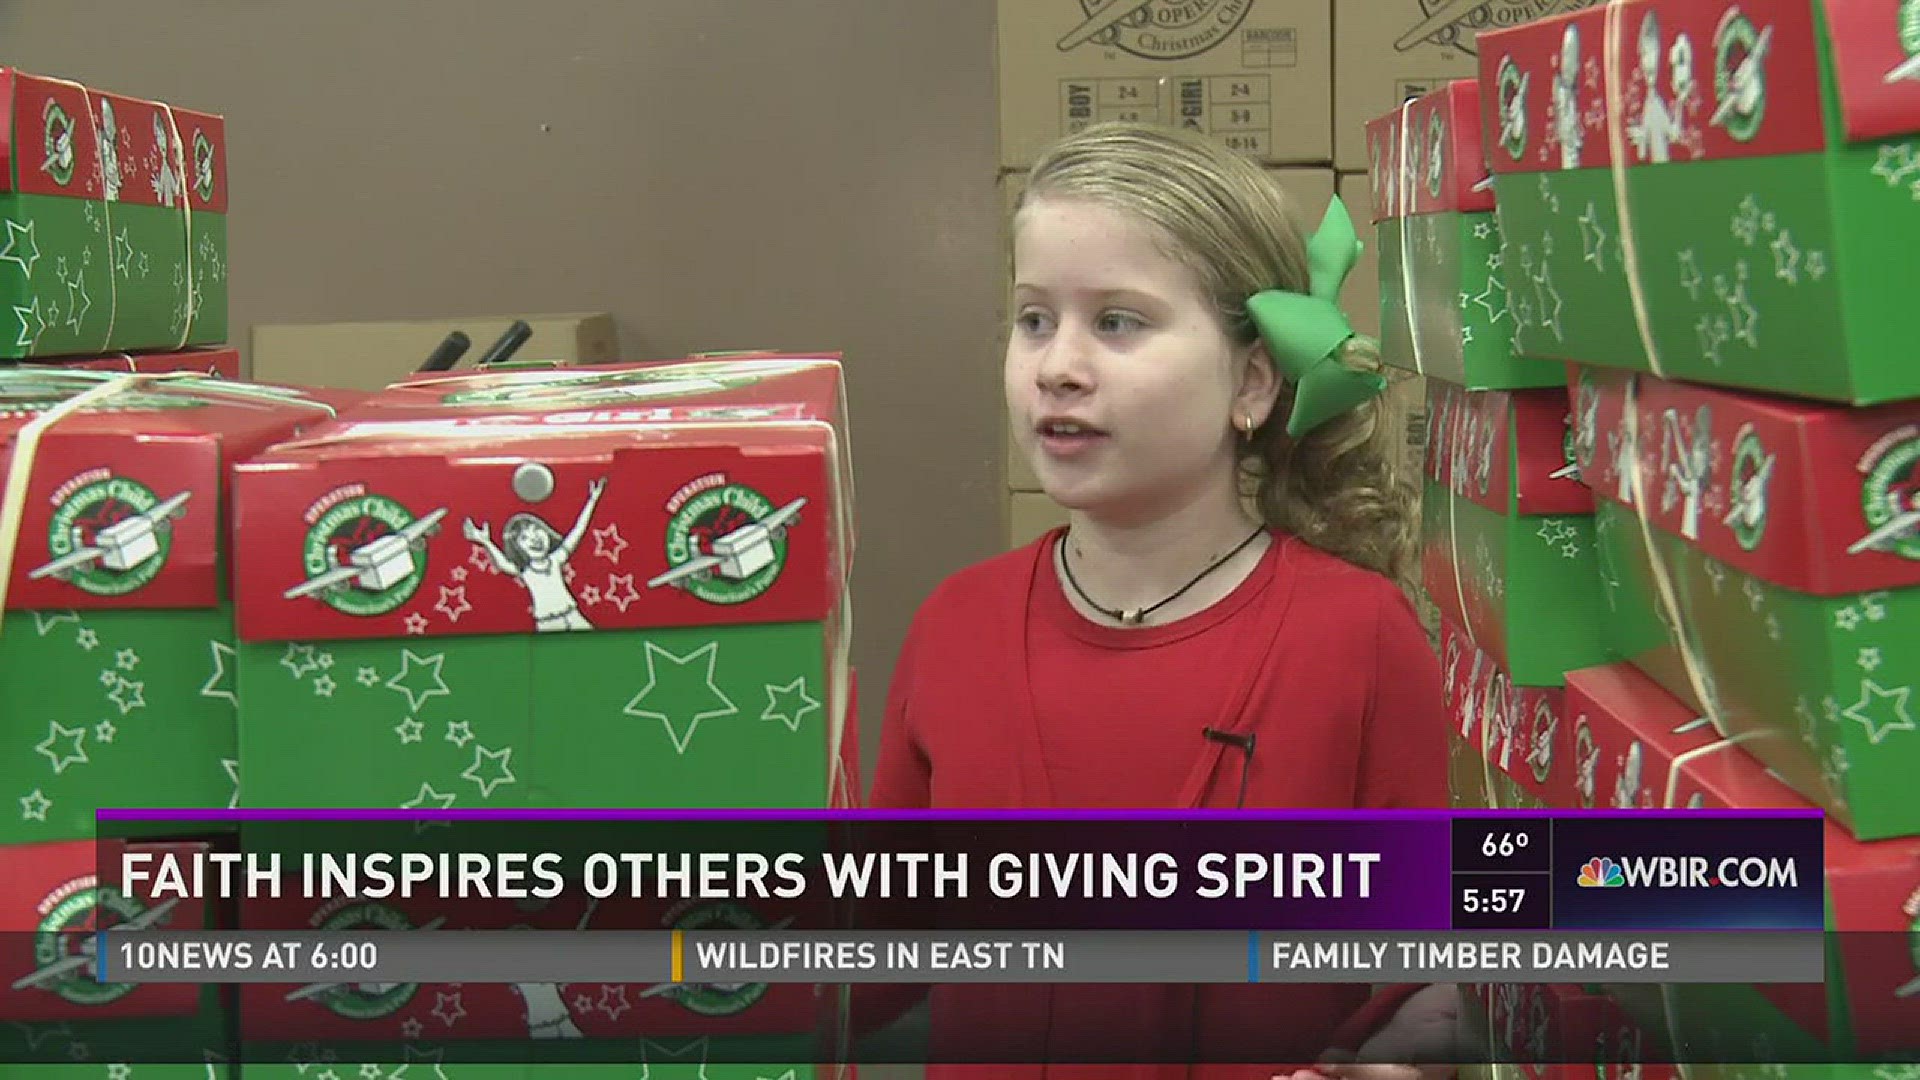 Nov. 16, 2016: An 11-year-old girl is helping Operation Christmas Child fill 20,000 shoeboxes full of school supplies, toys and hygiene items for other kids.